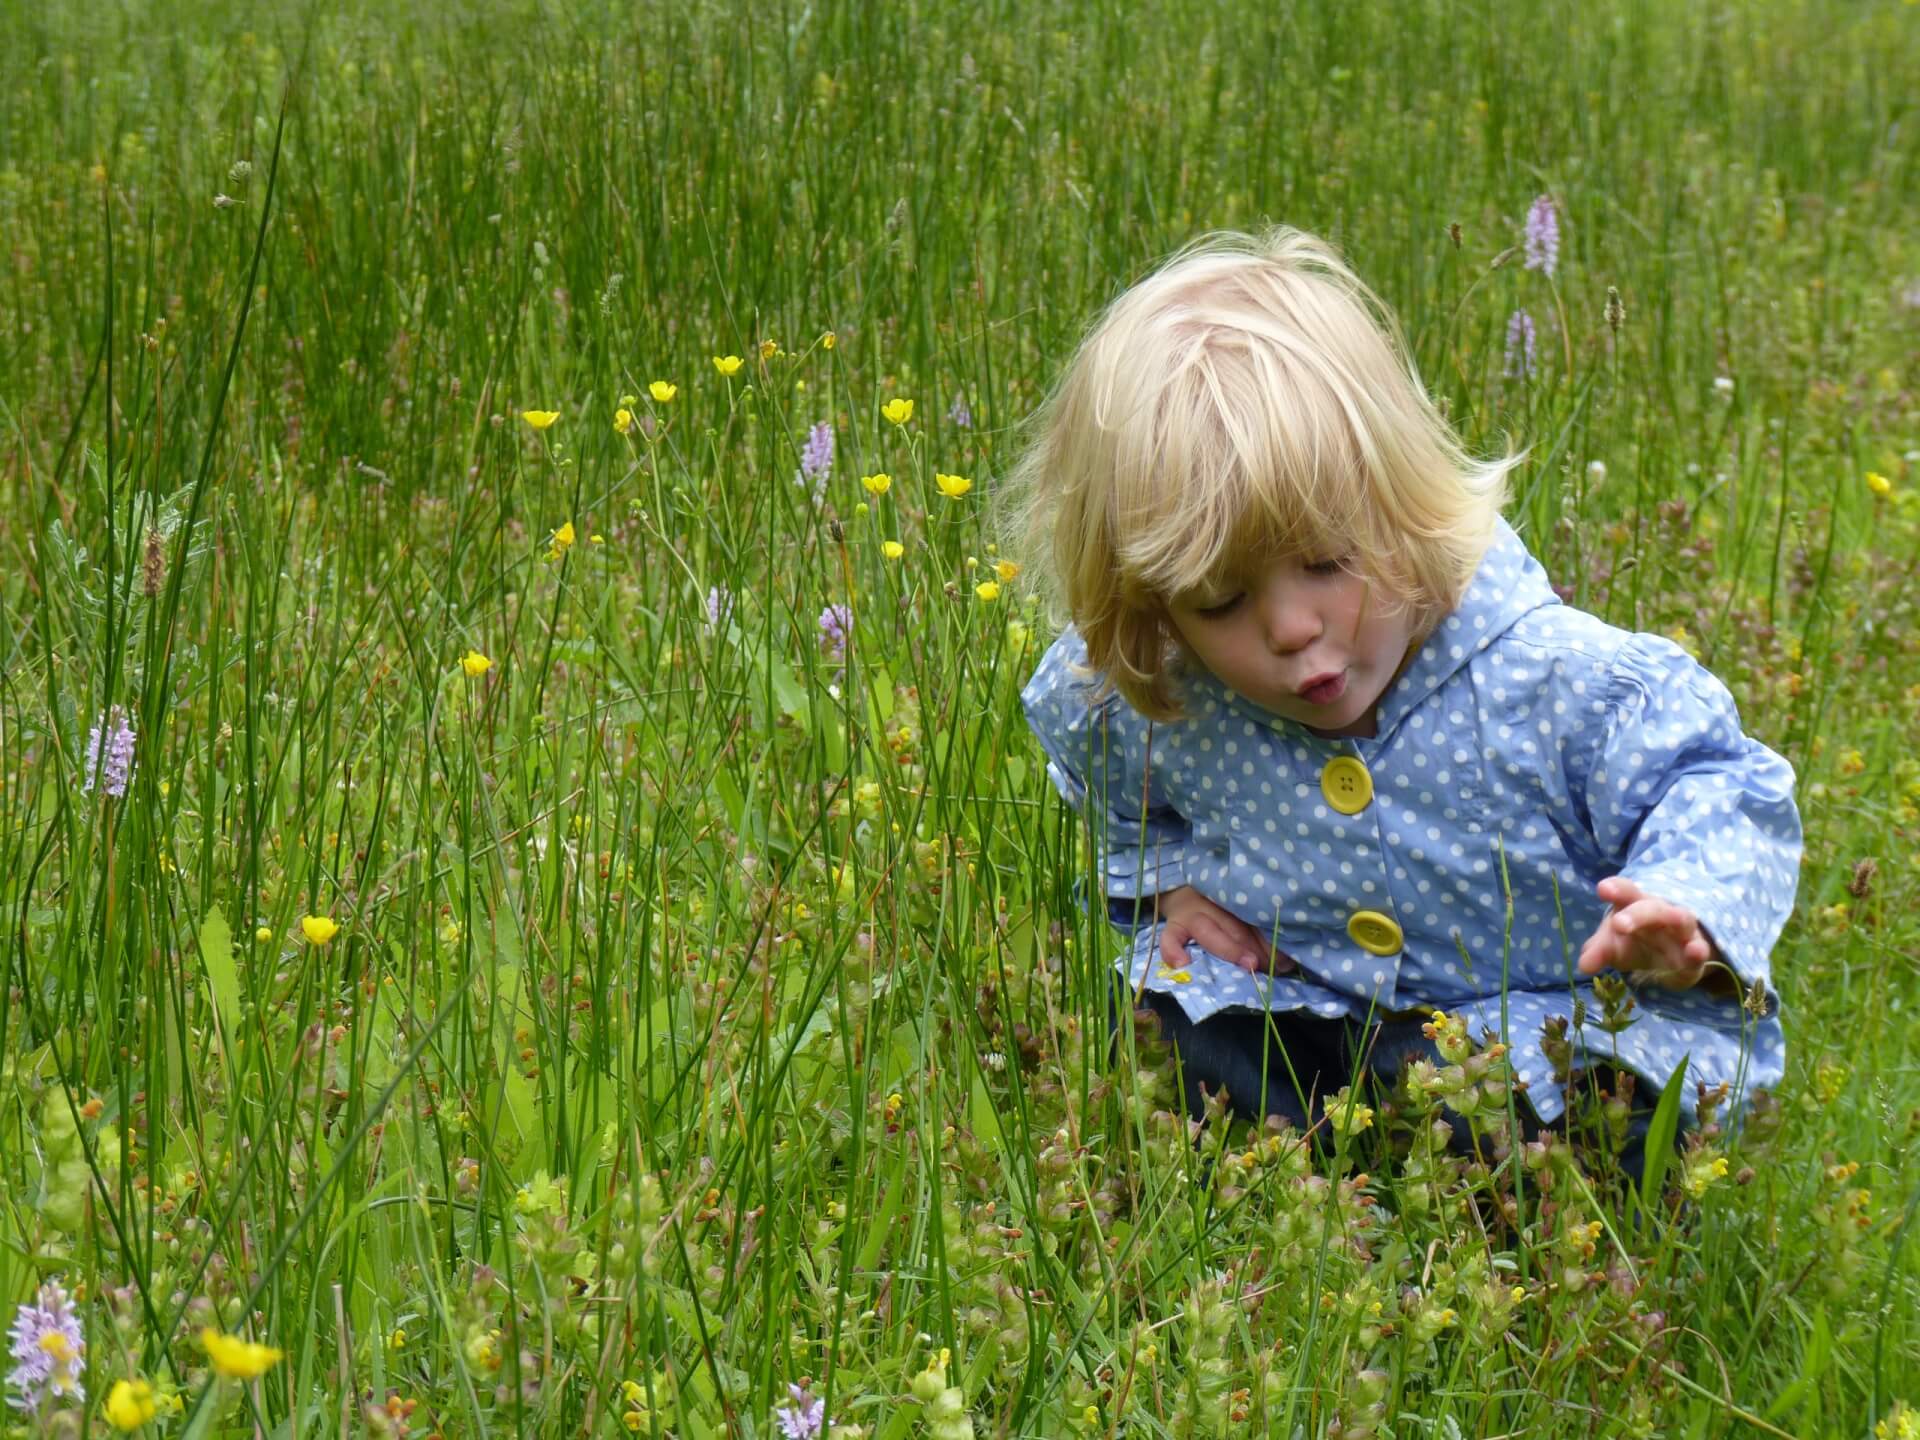 A small child wearing a blue coat in a green field looking at the wild flowers